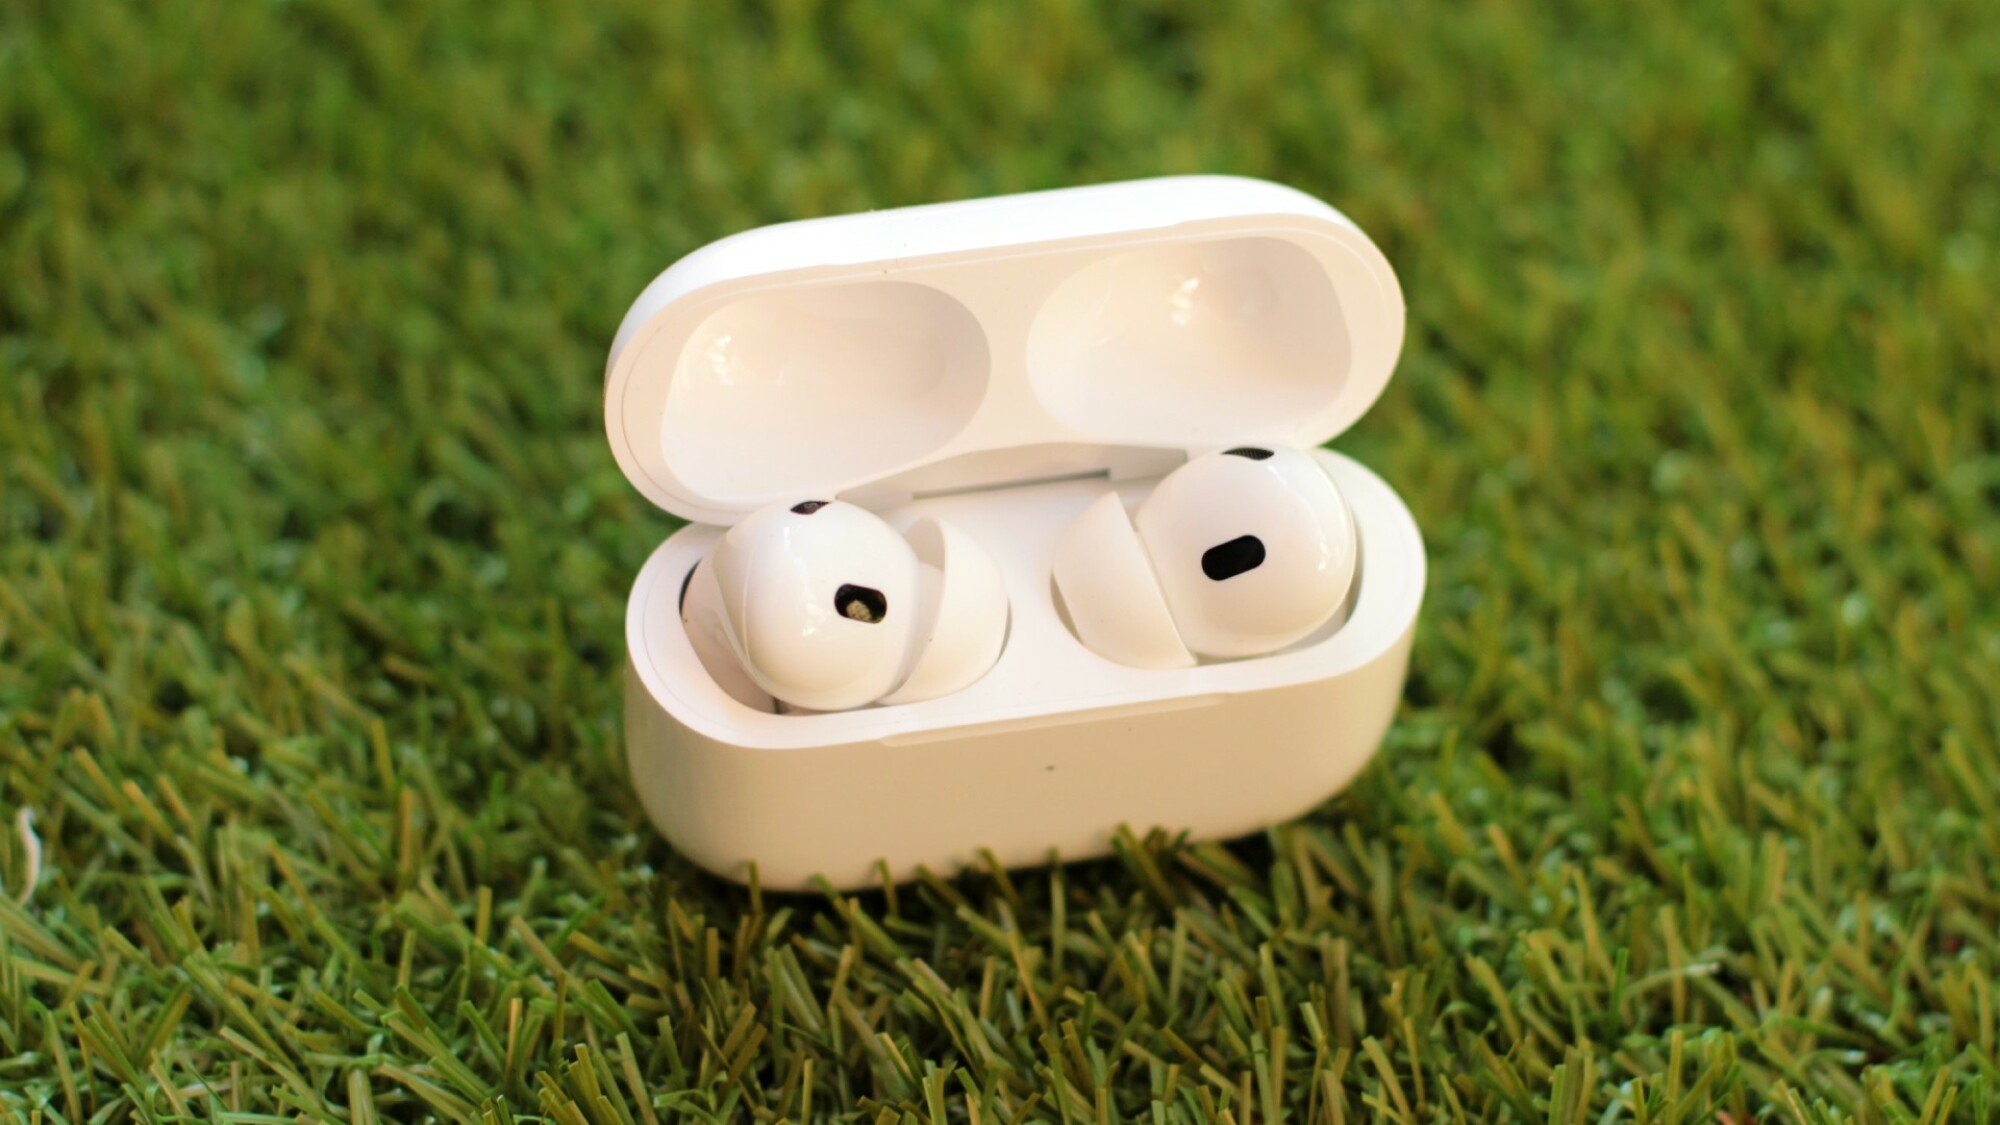 Apple AirPods Pro 2 and charging case